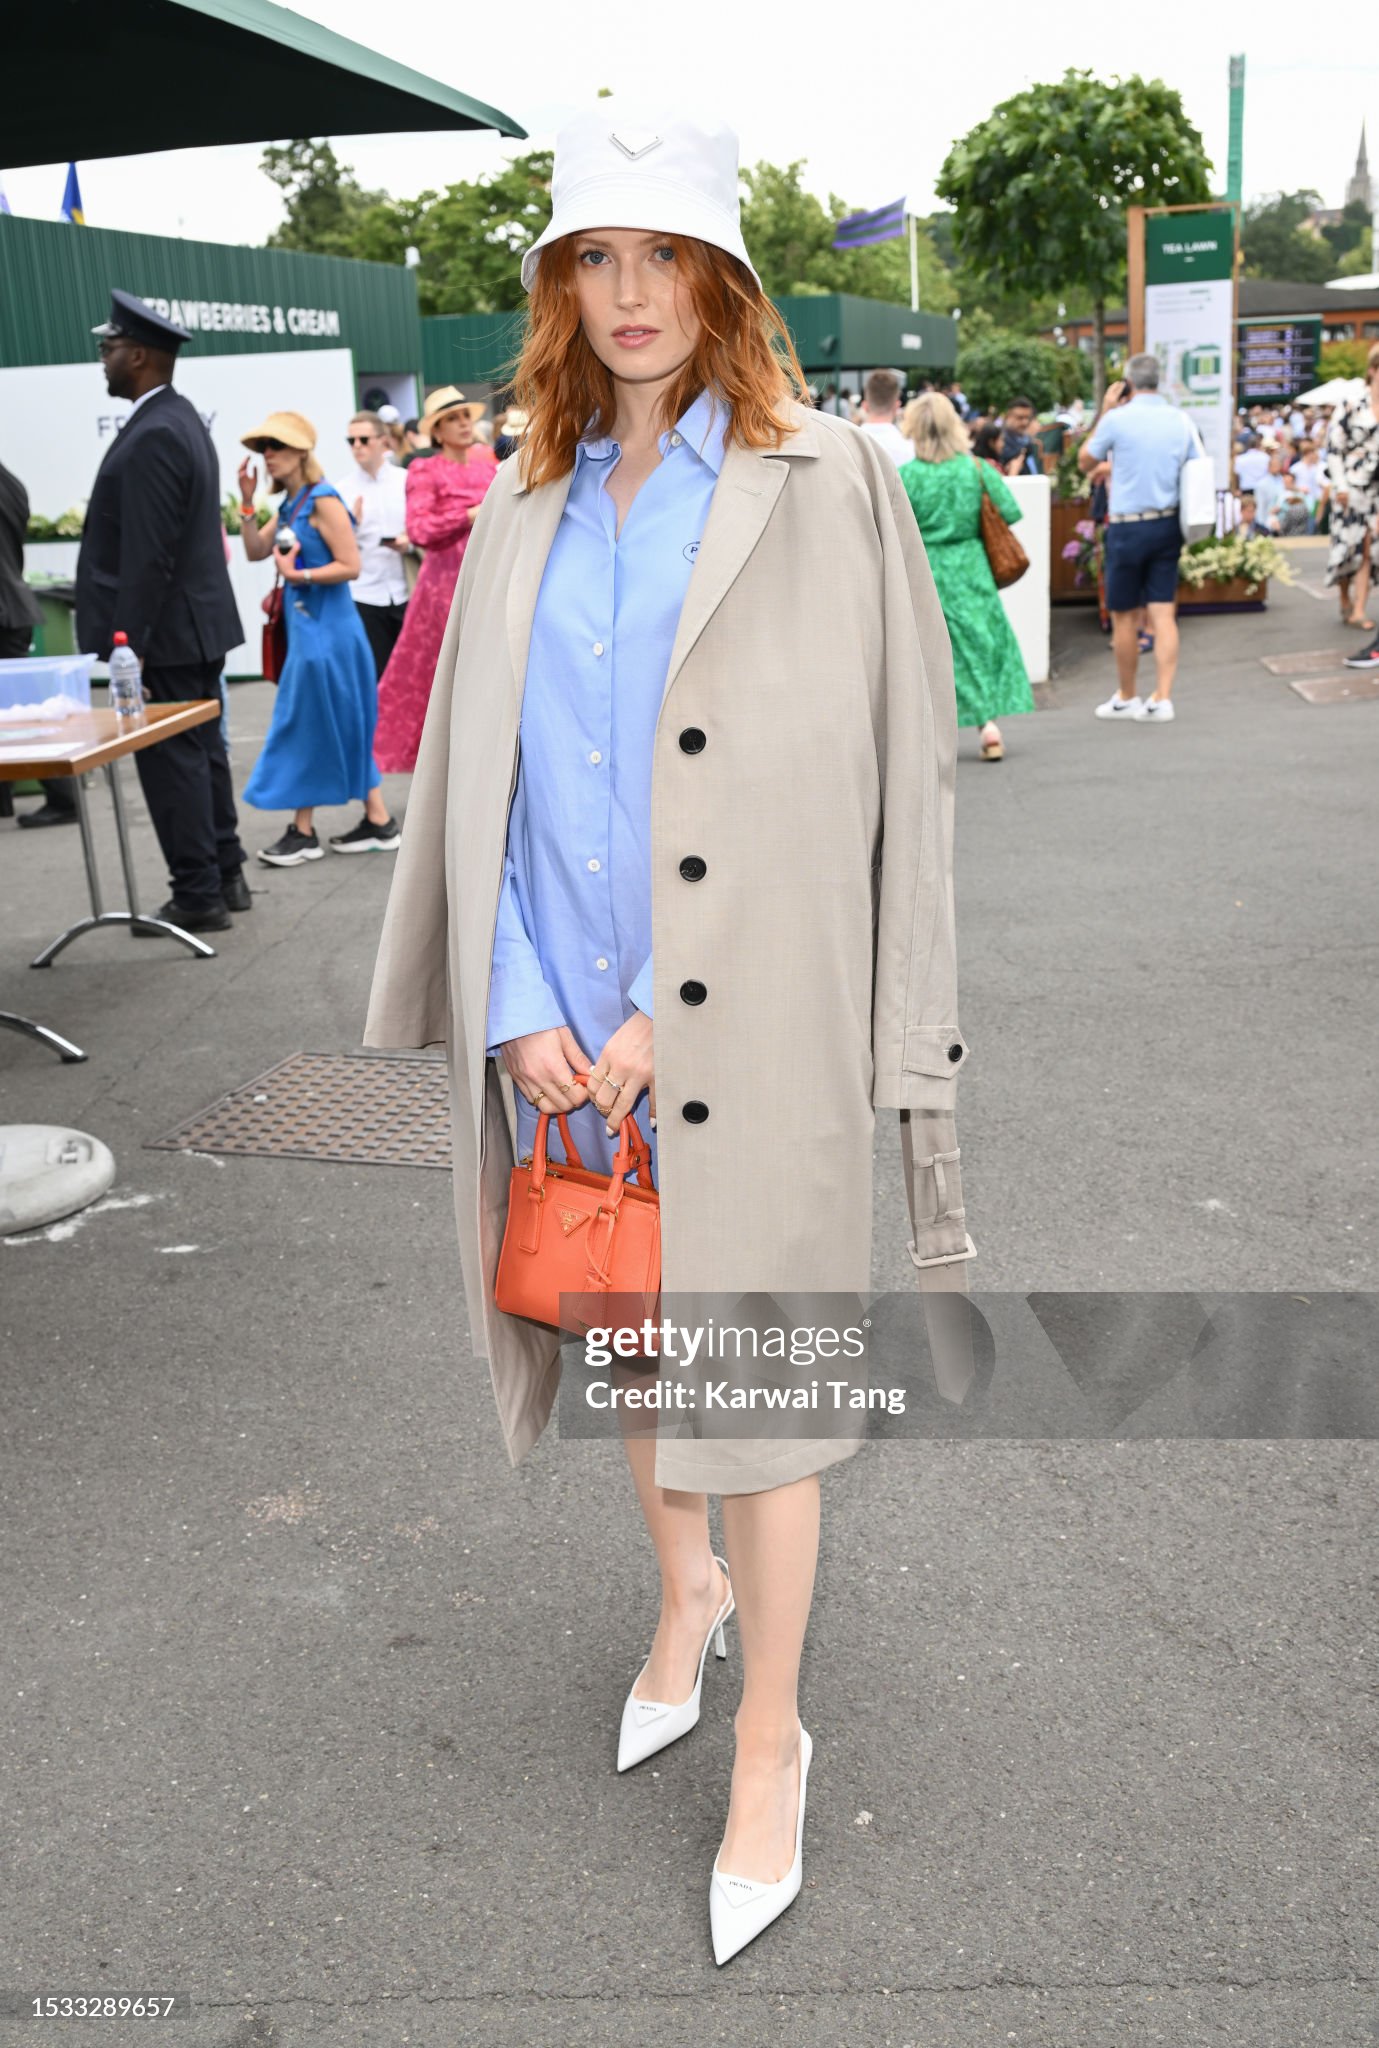 Ellie Bamber - attends day 9 of Wimbledon Tennis Championships in HQ